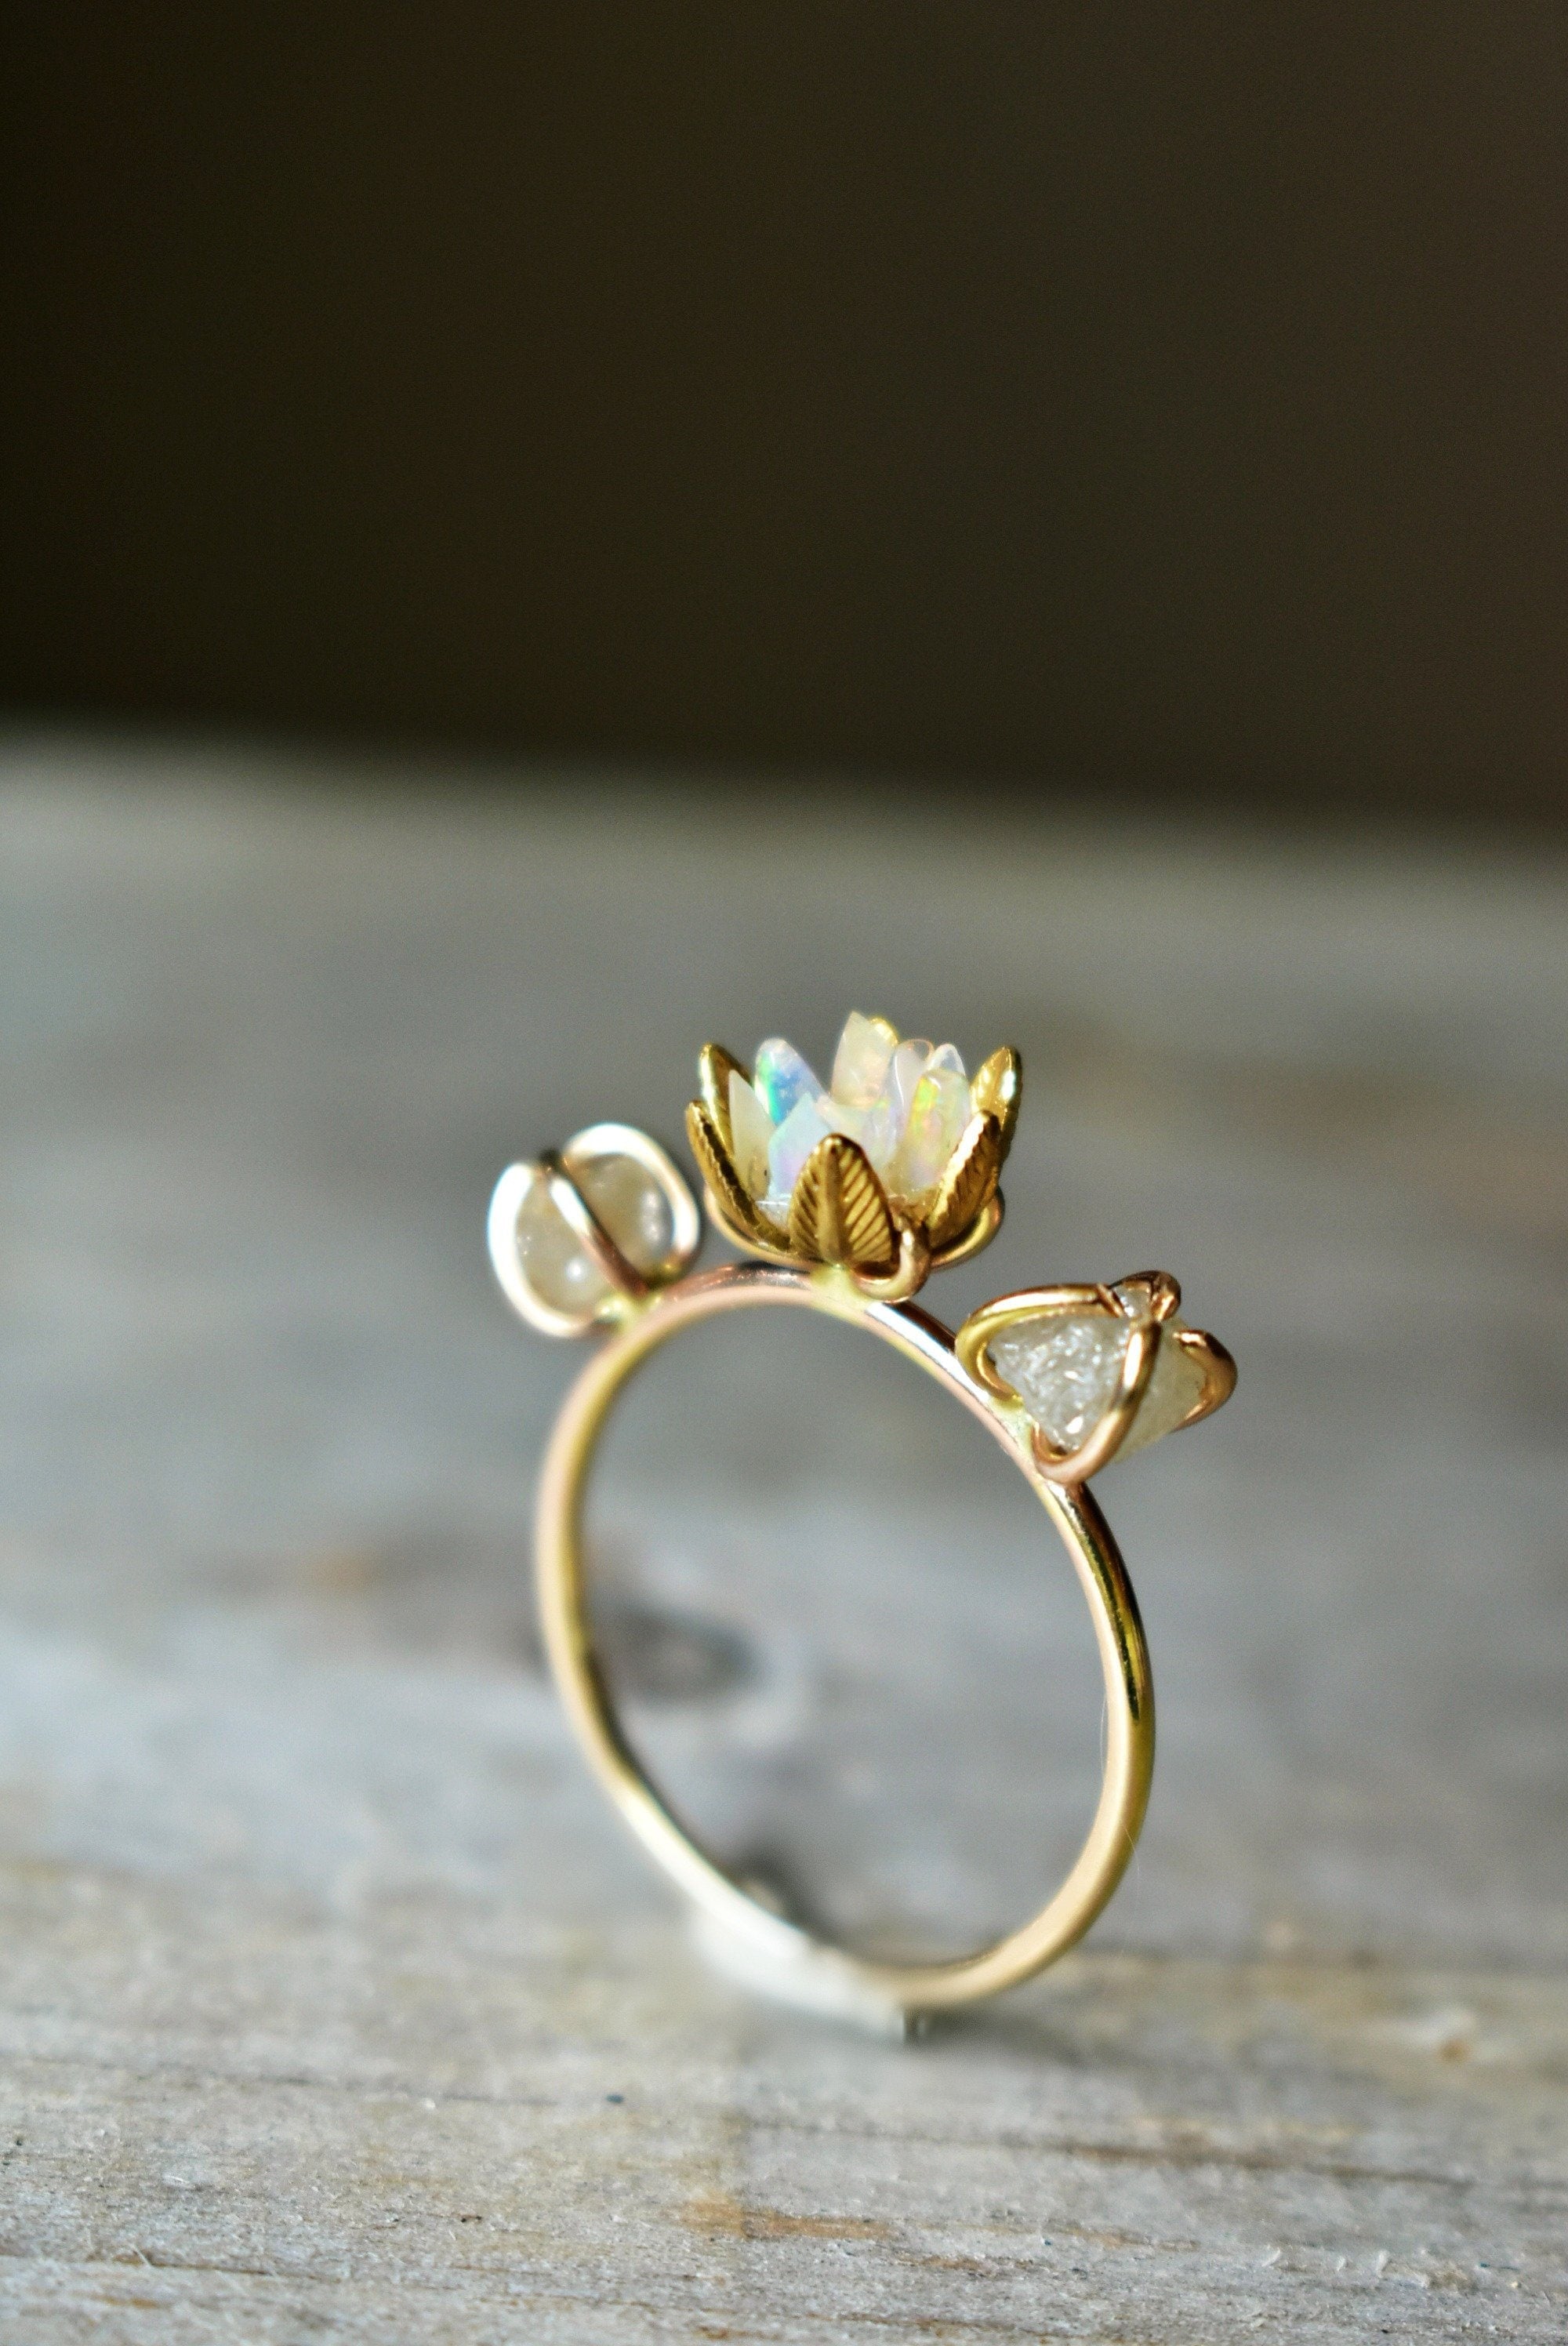 Raw Opal and Diamond Ring, Gold and Multiple Stone Opal Lotus Flower Ring, Women's April October Gemstone Birthstone Jewelry, Custom Ring